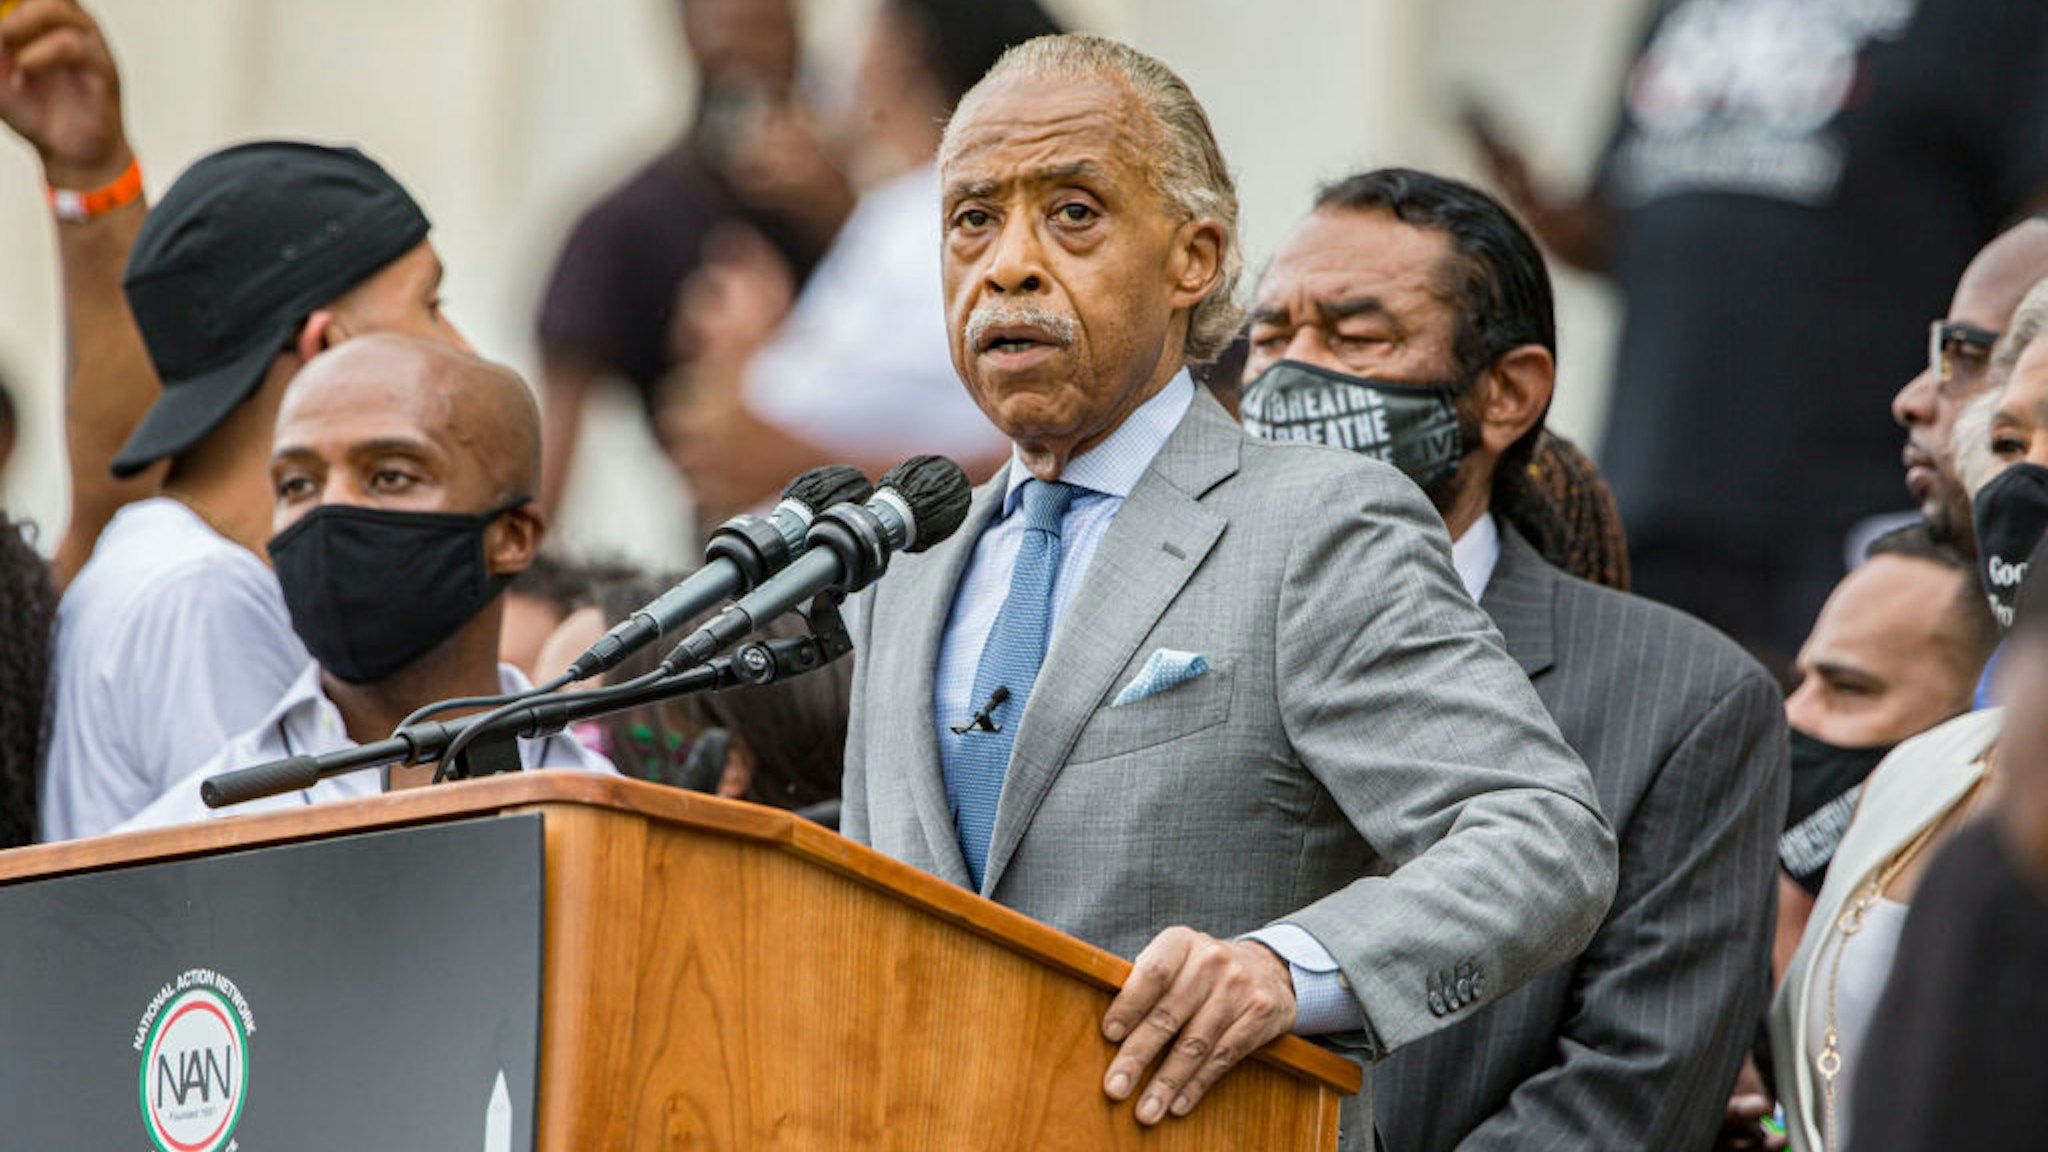 Rev. Al Sharpton speaks at the 2020 March on Washington, officially known as the “Commitment March: Get Your Knee Off Our Necks,” at the Lincoln Memorial on August 28, 2020 in Washington, DC.